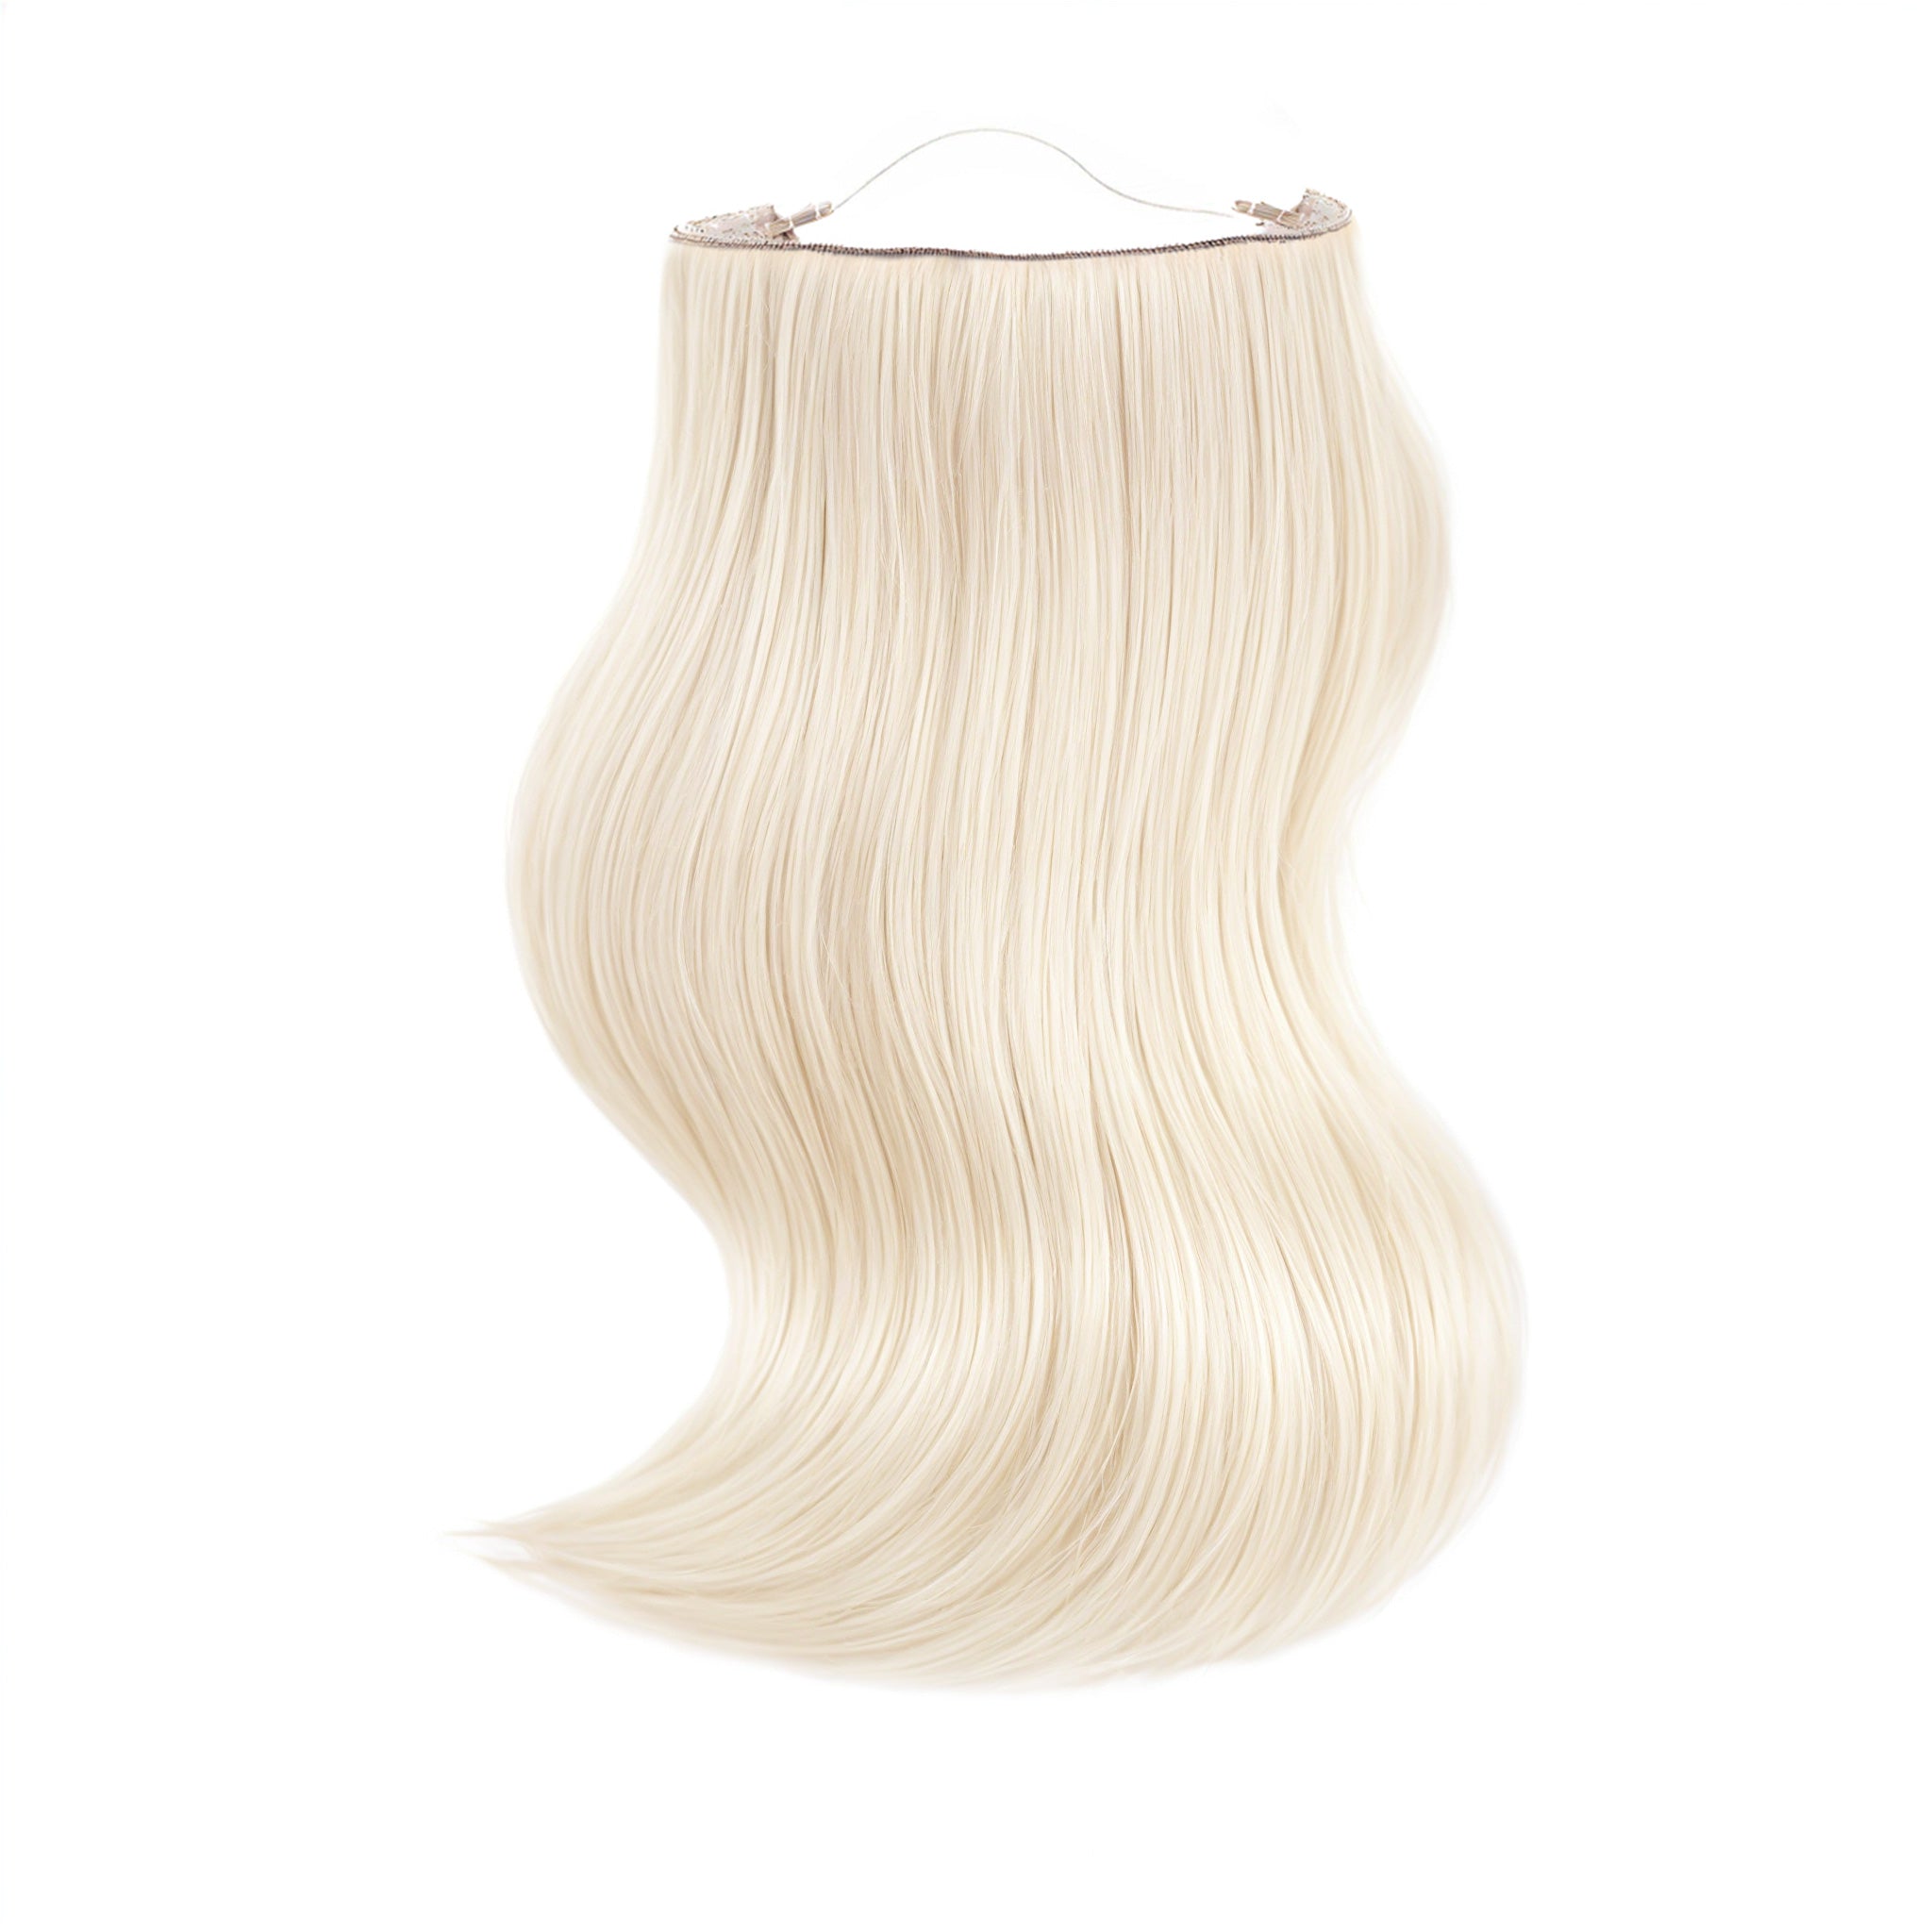 White Blonde Hair Extensions, natural human hair extensions